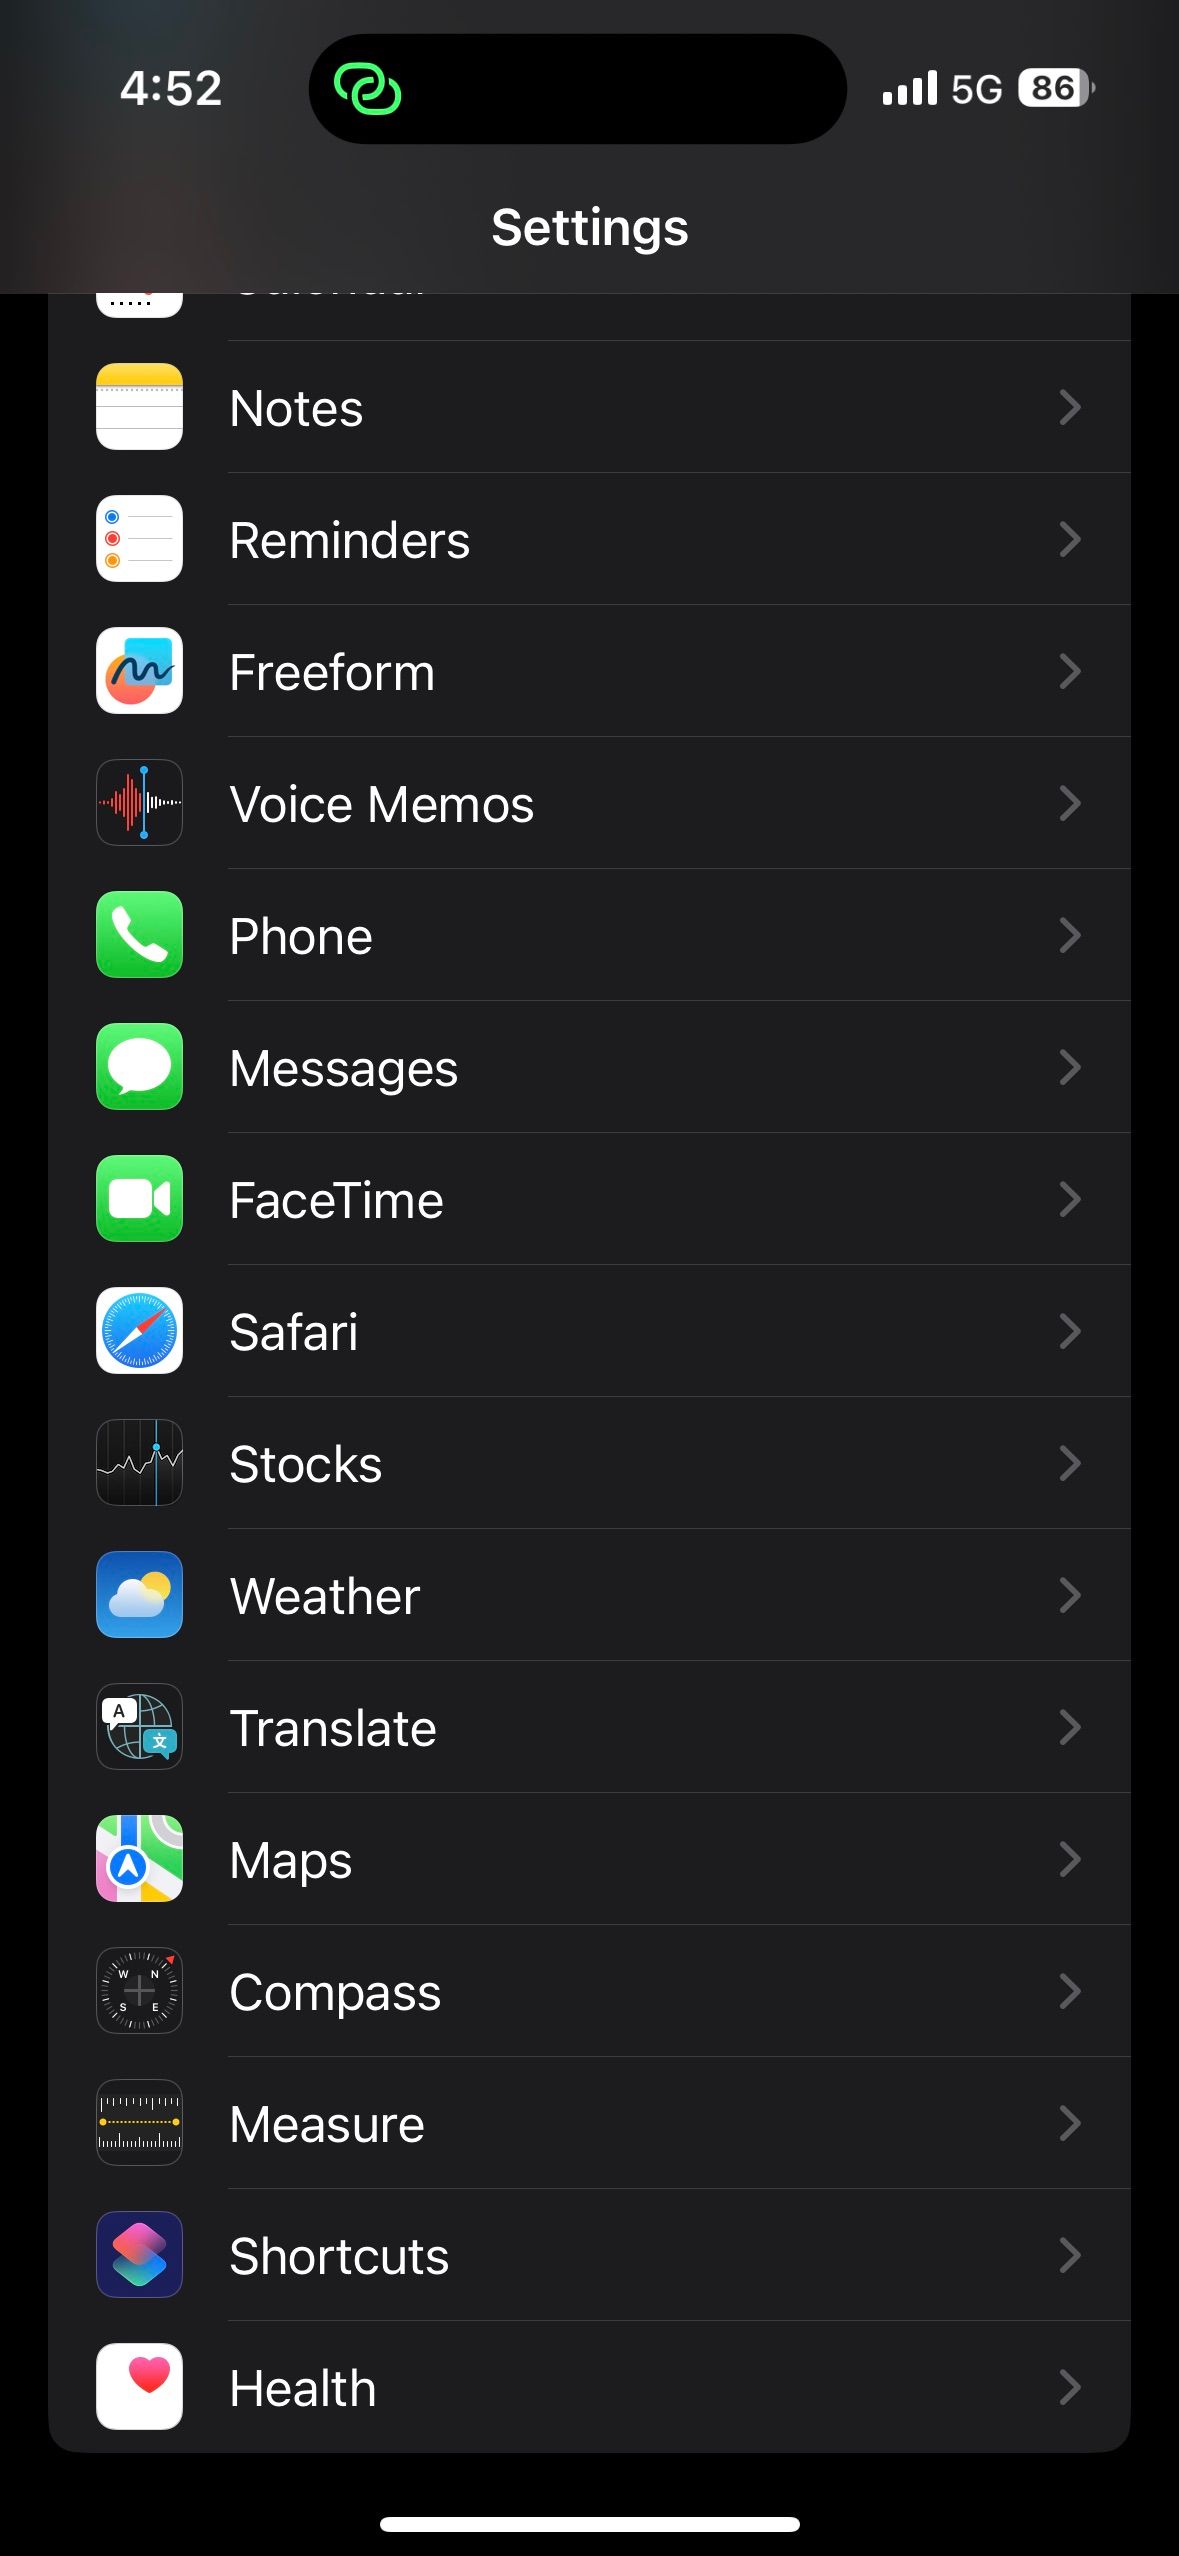 Safari subsection in iOS settings